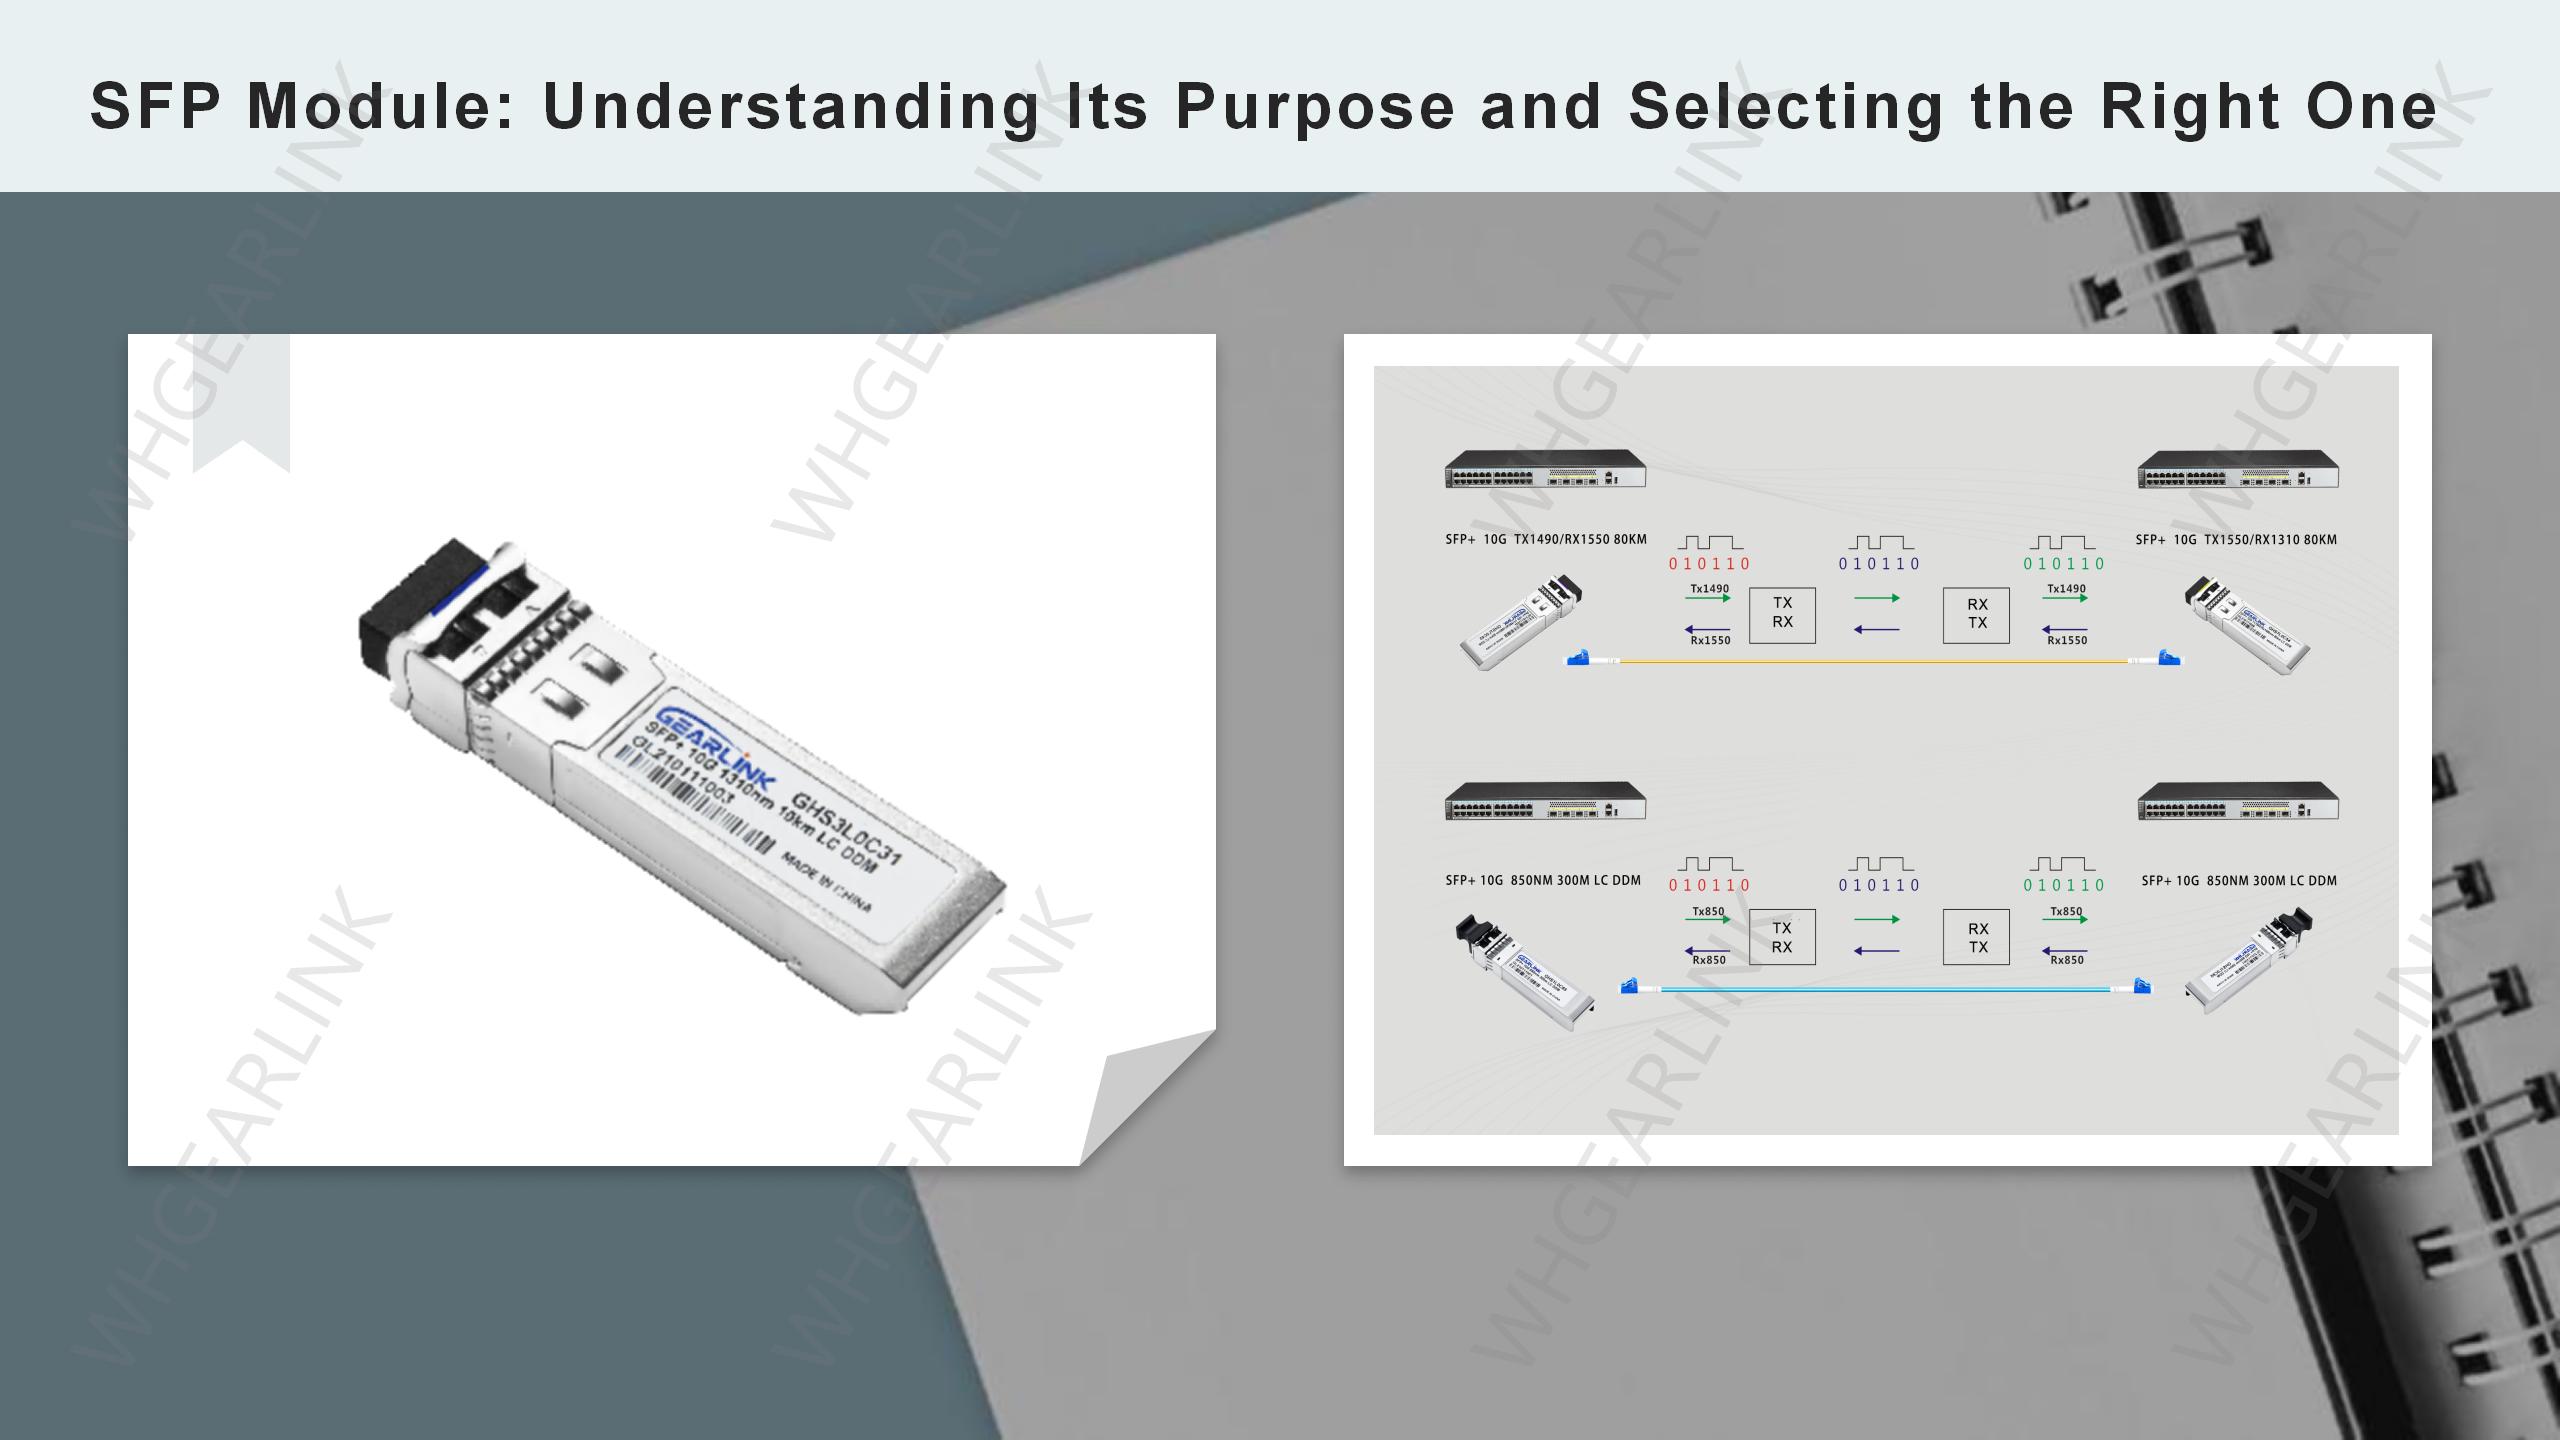 SFP Module: Understanding Its Purpose and Selecting the Right One